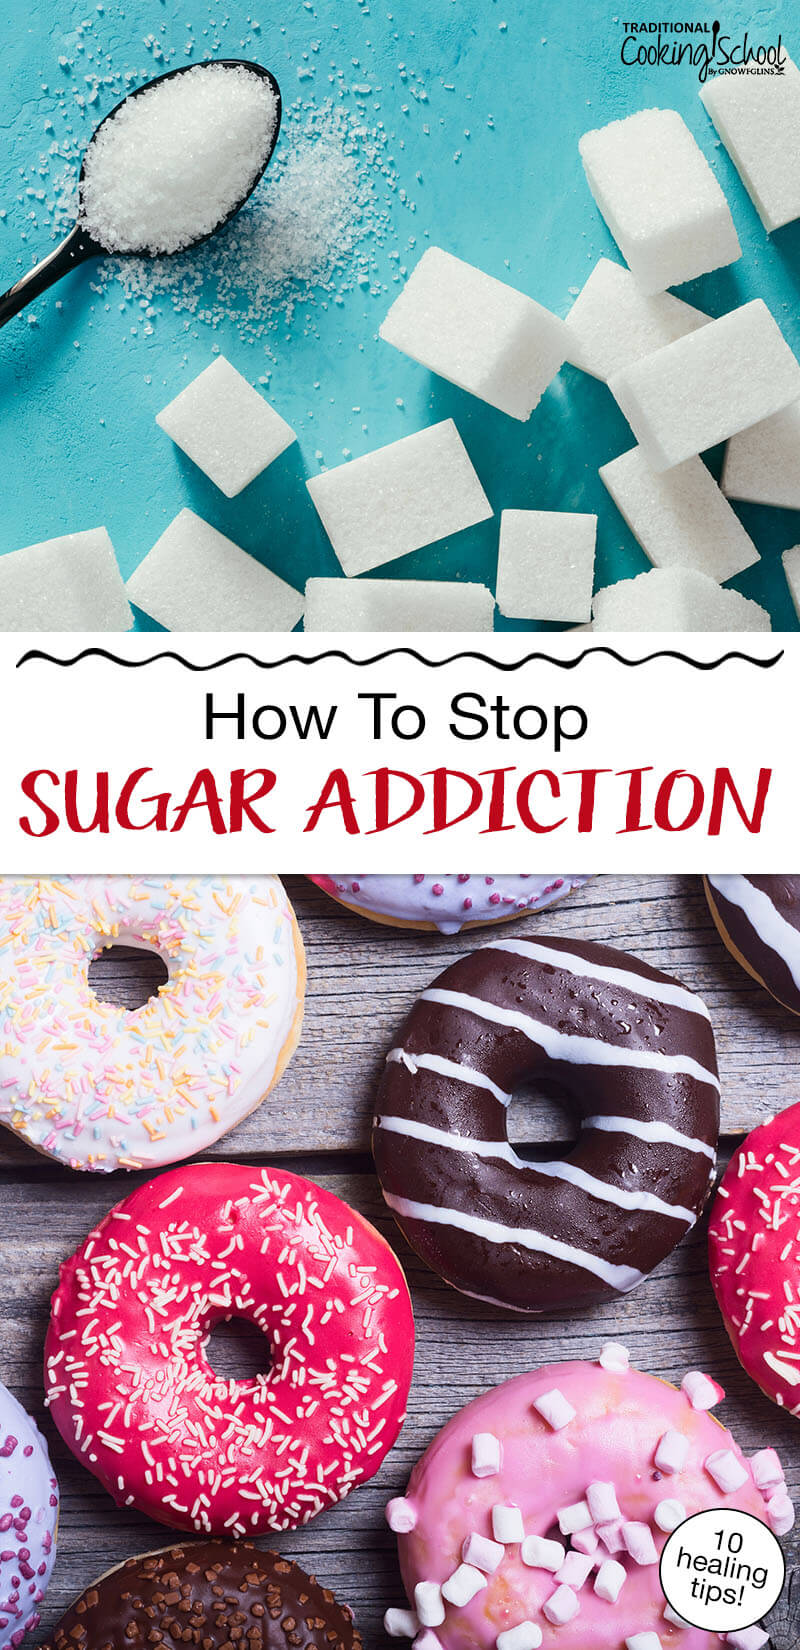 Photo collage of sugar cubes on a turquoise background and a variety of donuts. Text overlay says: "How to Stop Sugar Addiction (10 healing tips!)"